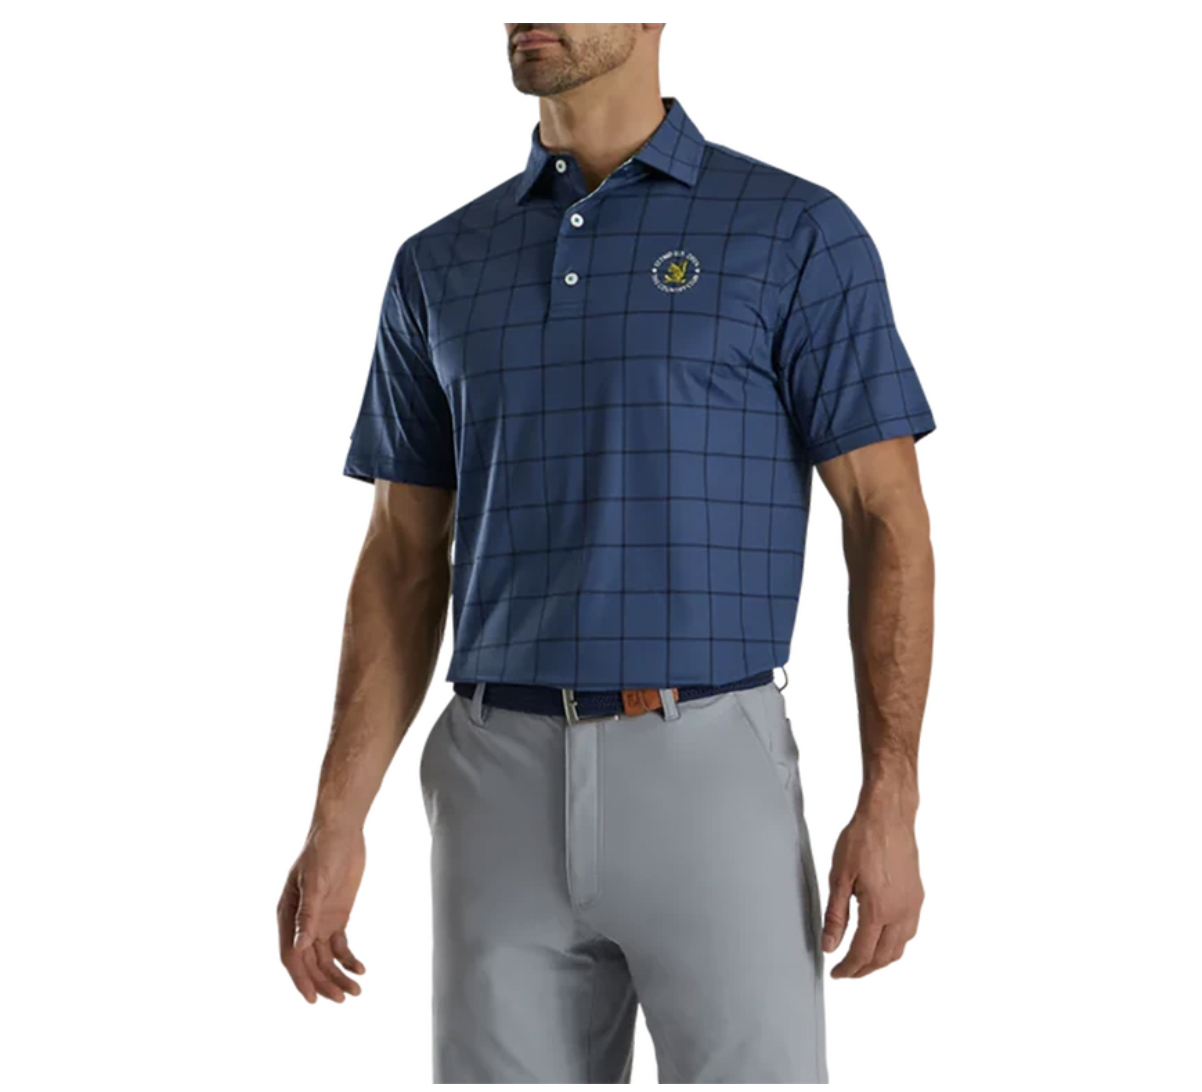 25 great Father's Day golf gifts for dad – GolfWRX